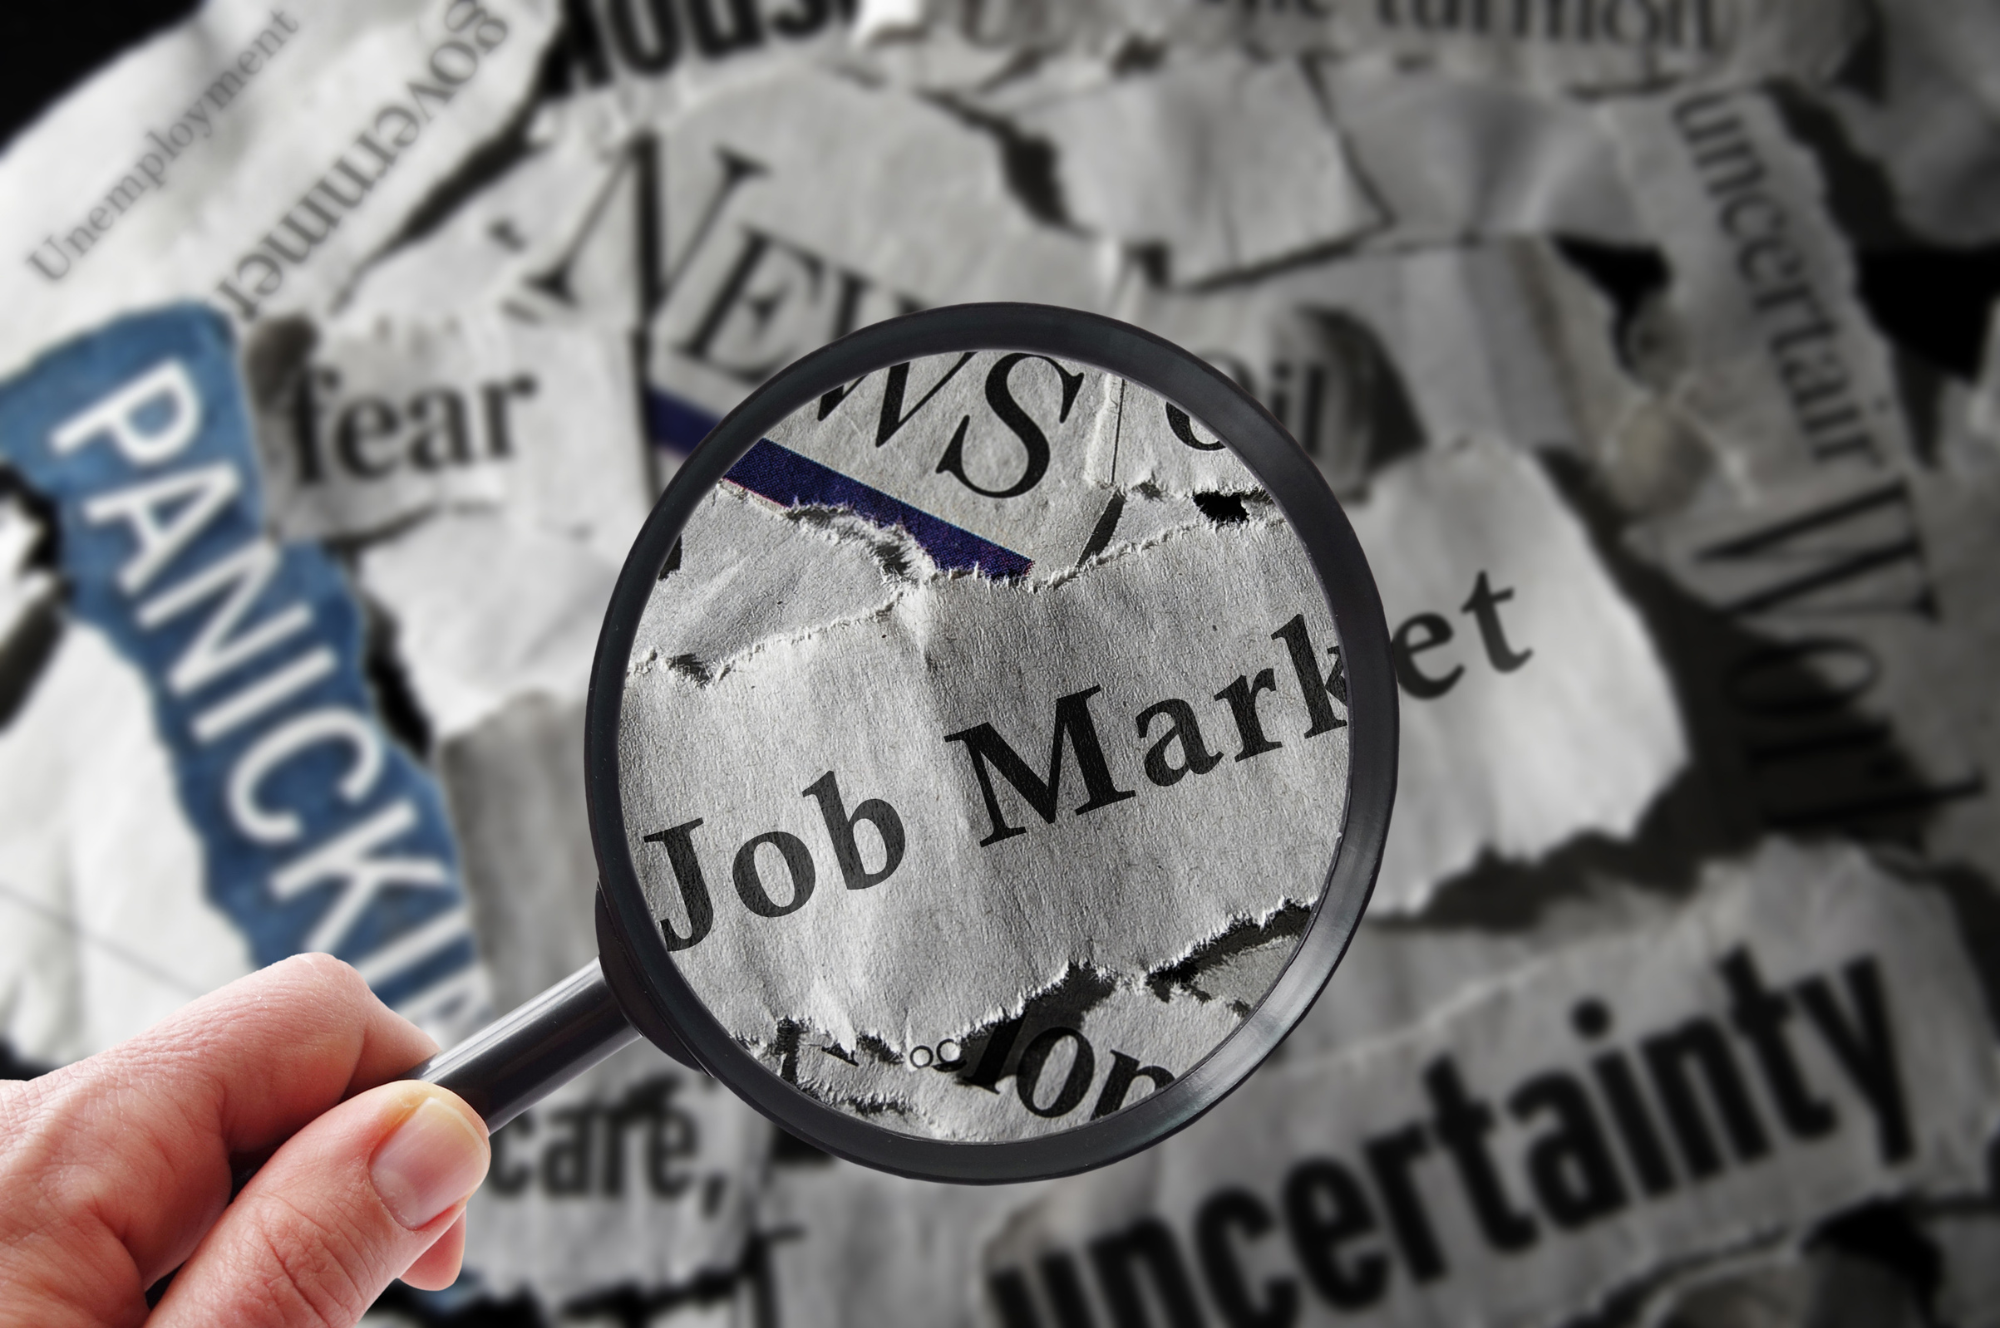 IT Job Market Update : Have we hit the bottom of the IT jobs market? 6 reasons I think we have